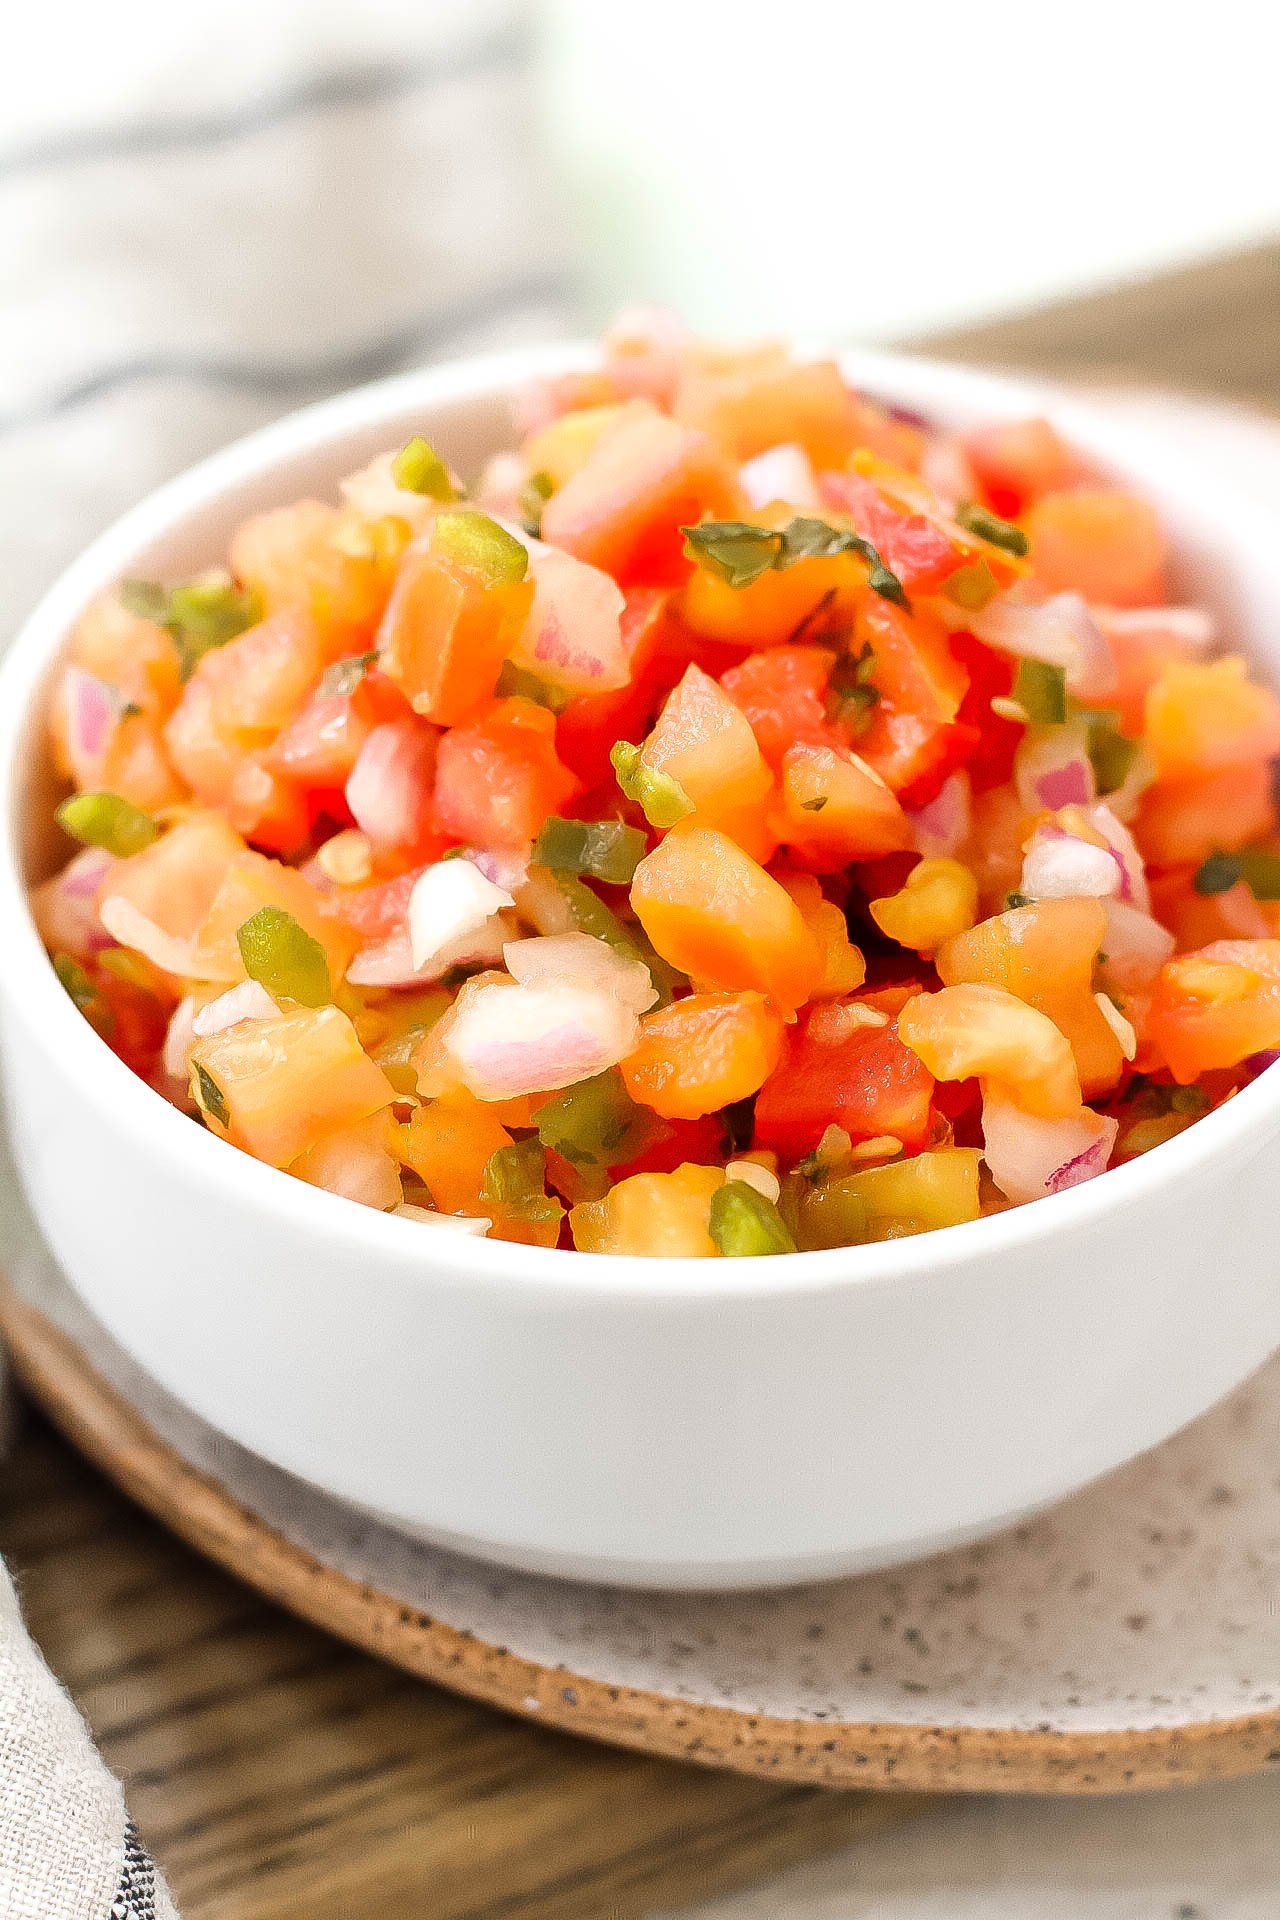 This easy Pico de Gallo is a fresh Whole30 and Paleo salsa option. It takes 10 minutes to have a delicious homemade pico for tacos, tortilla chips, salads, or fajitas! This Pico de Gallo is made with only a few simple ingredients like tomatoes, cilantro, onions, and lime juice! #whole30salsa #whole30pico #paleosalsa #picodegallo